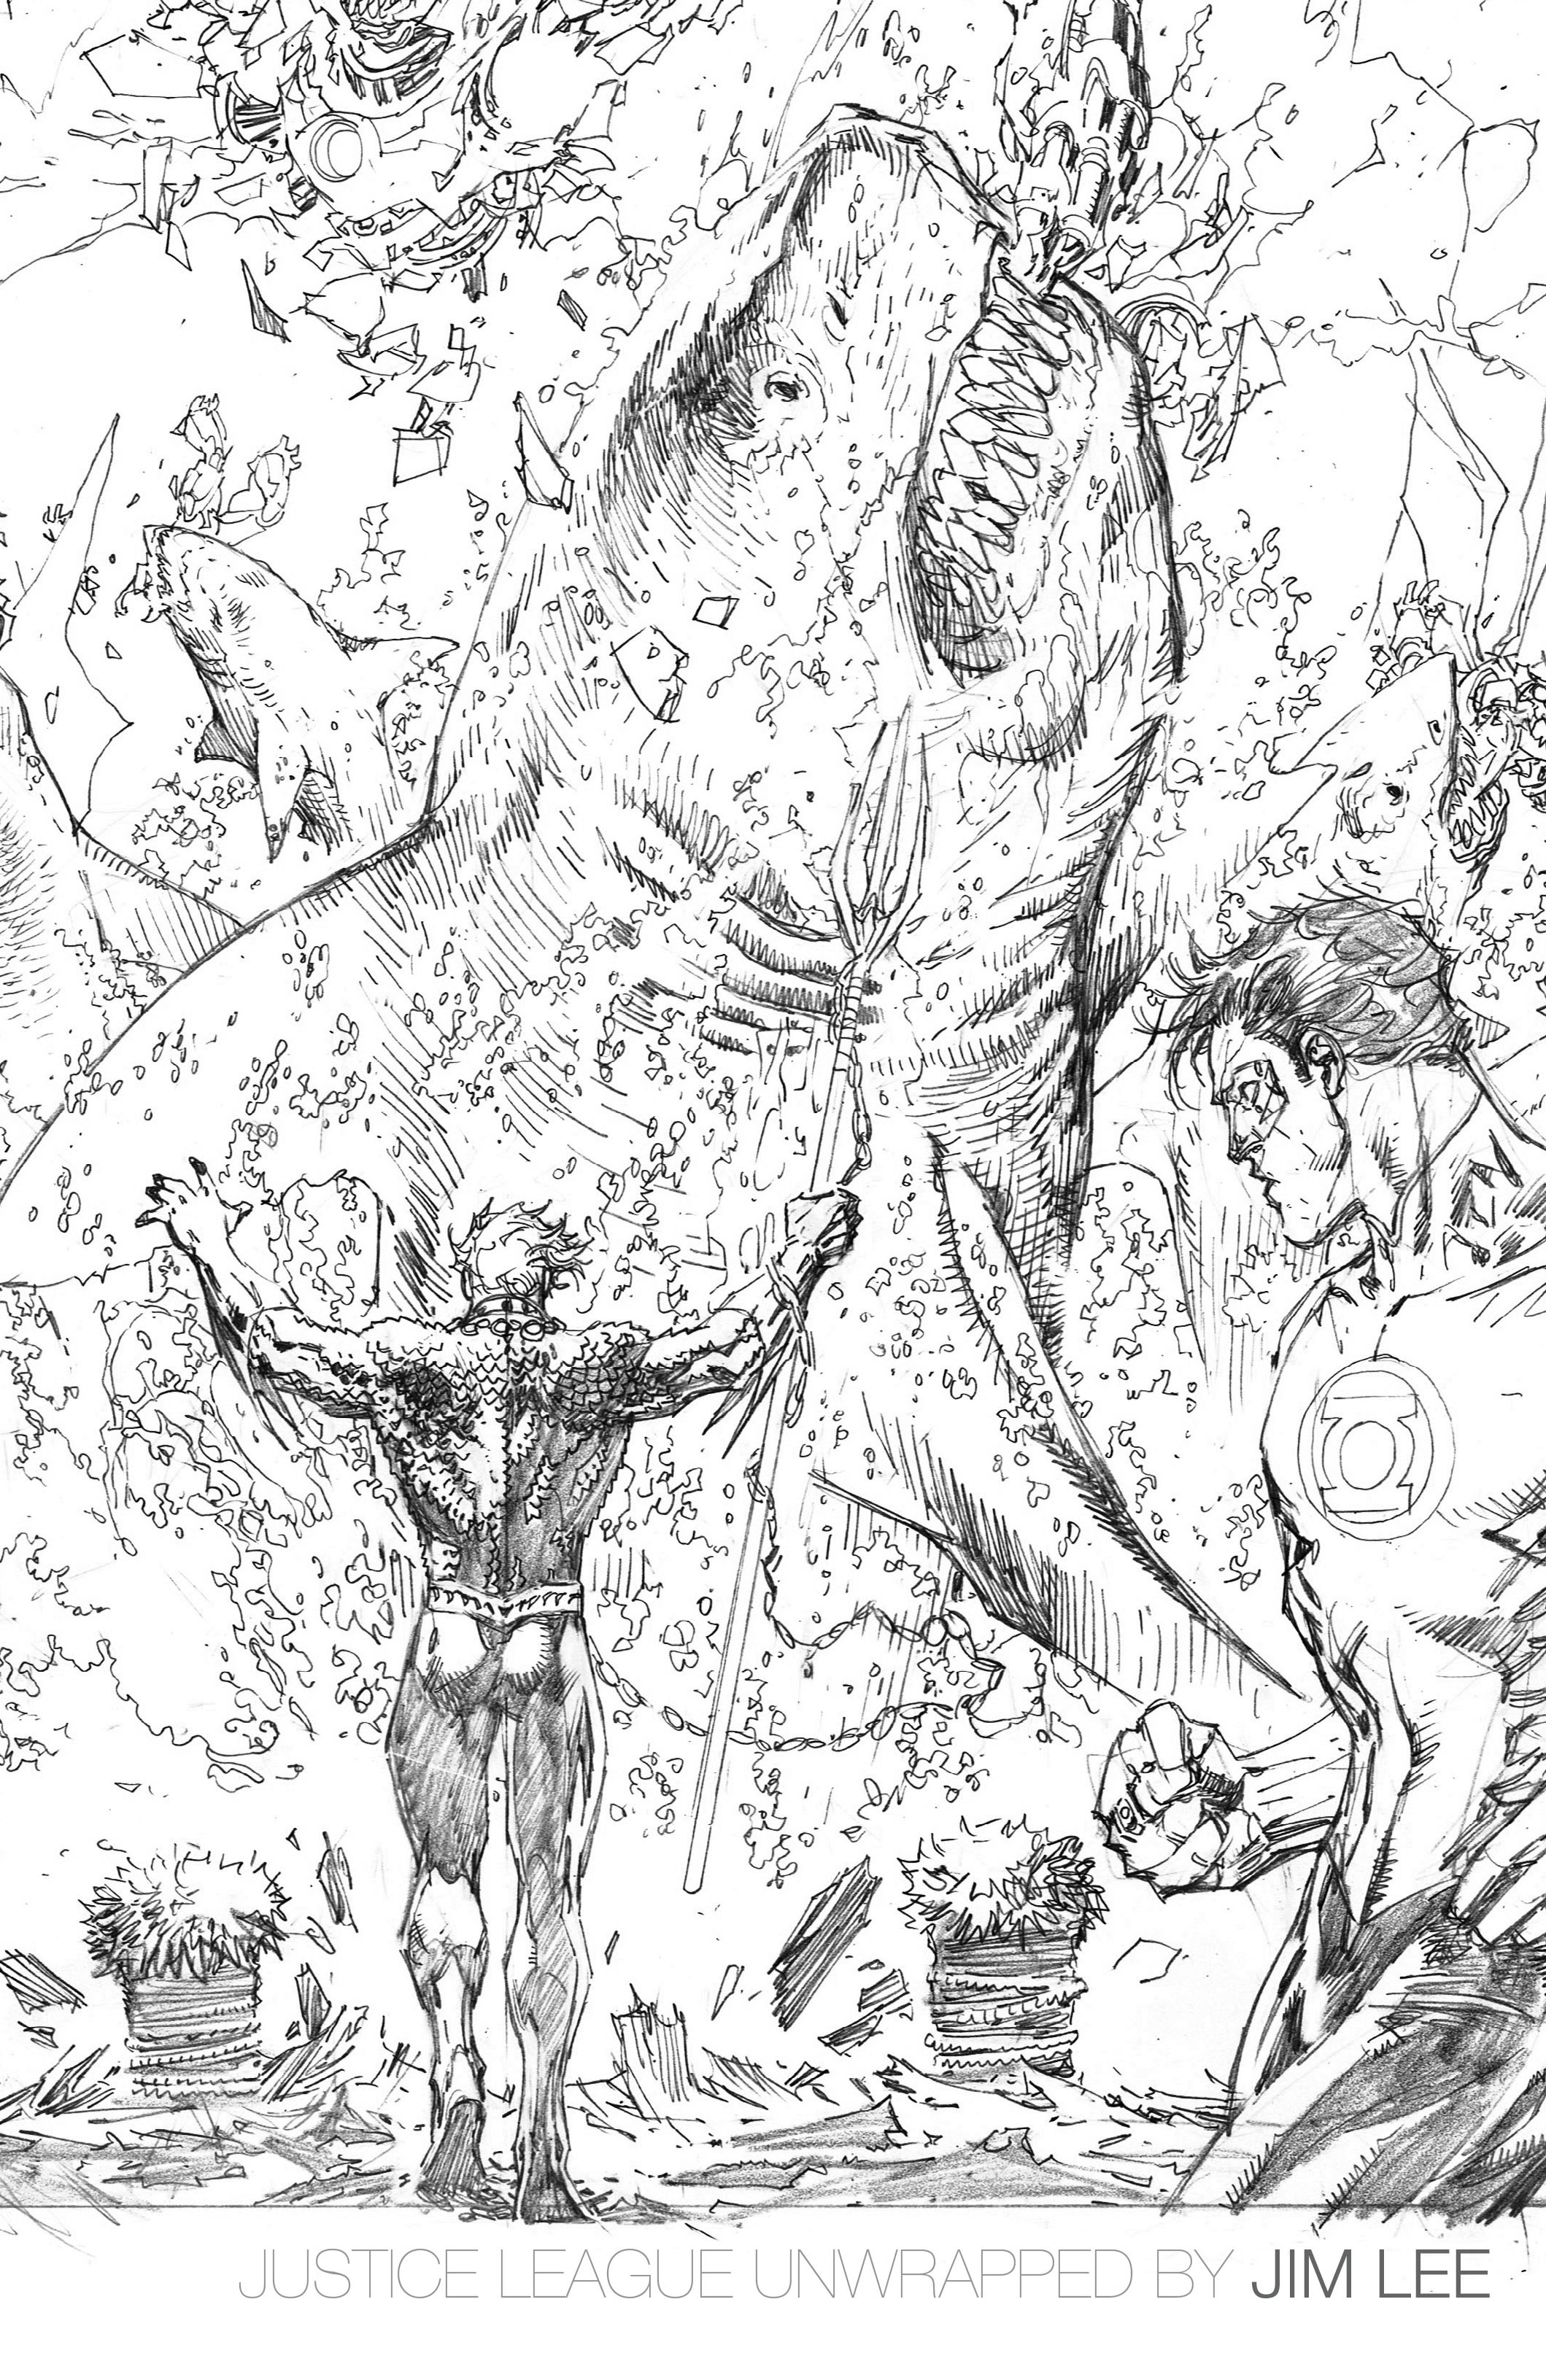 Justice League Unwrapped by Jim Lee (2017): Chapter 1 - Page 2